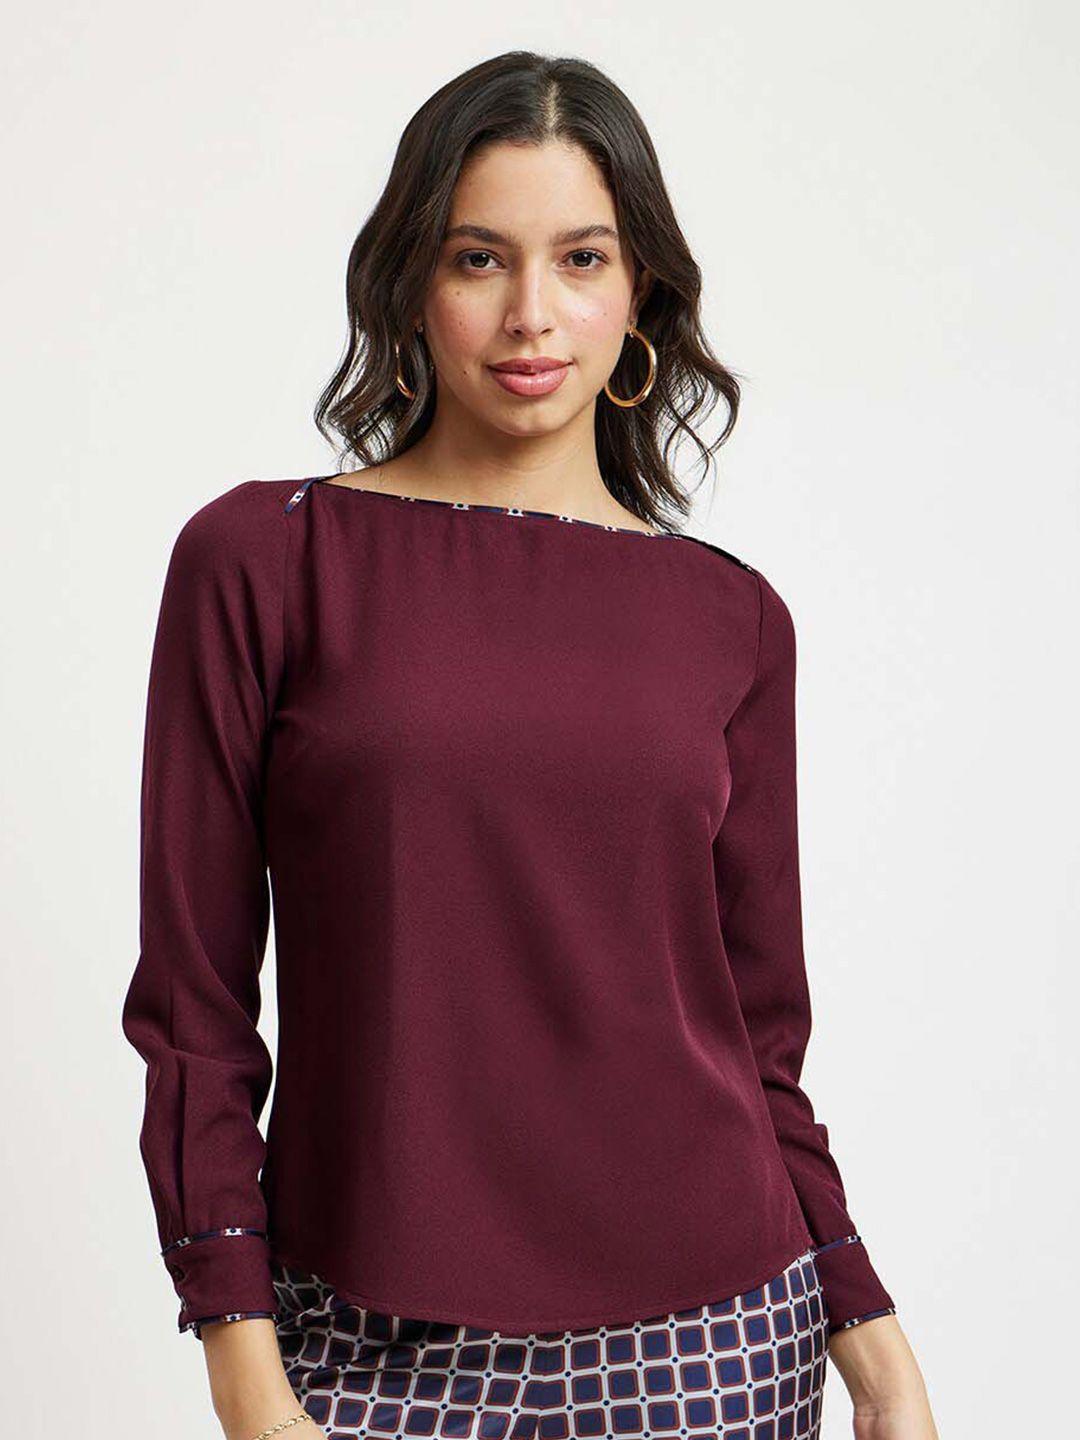 fablestreet boat neck cuffed sleeves regular top